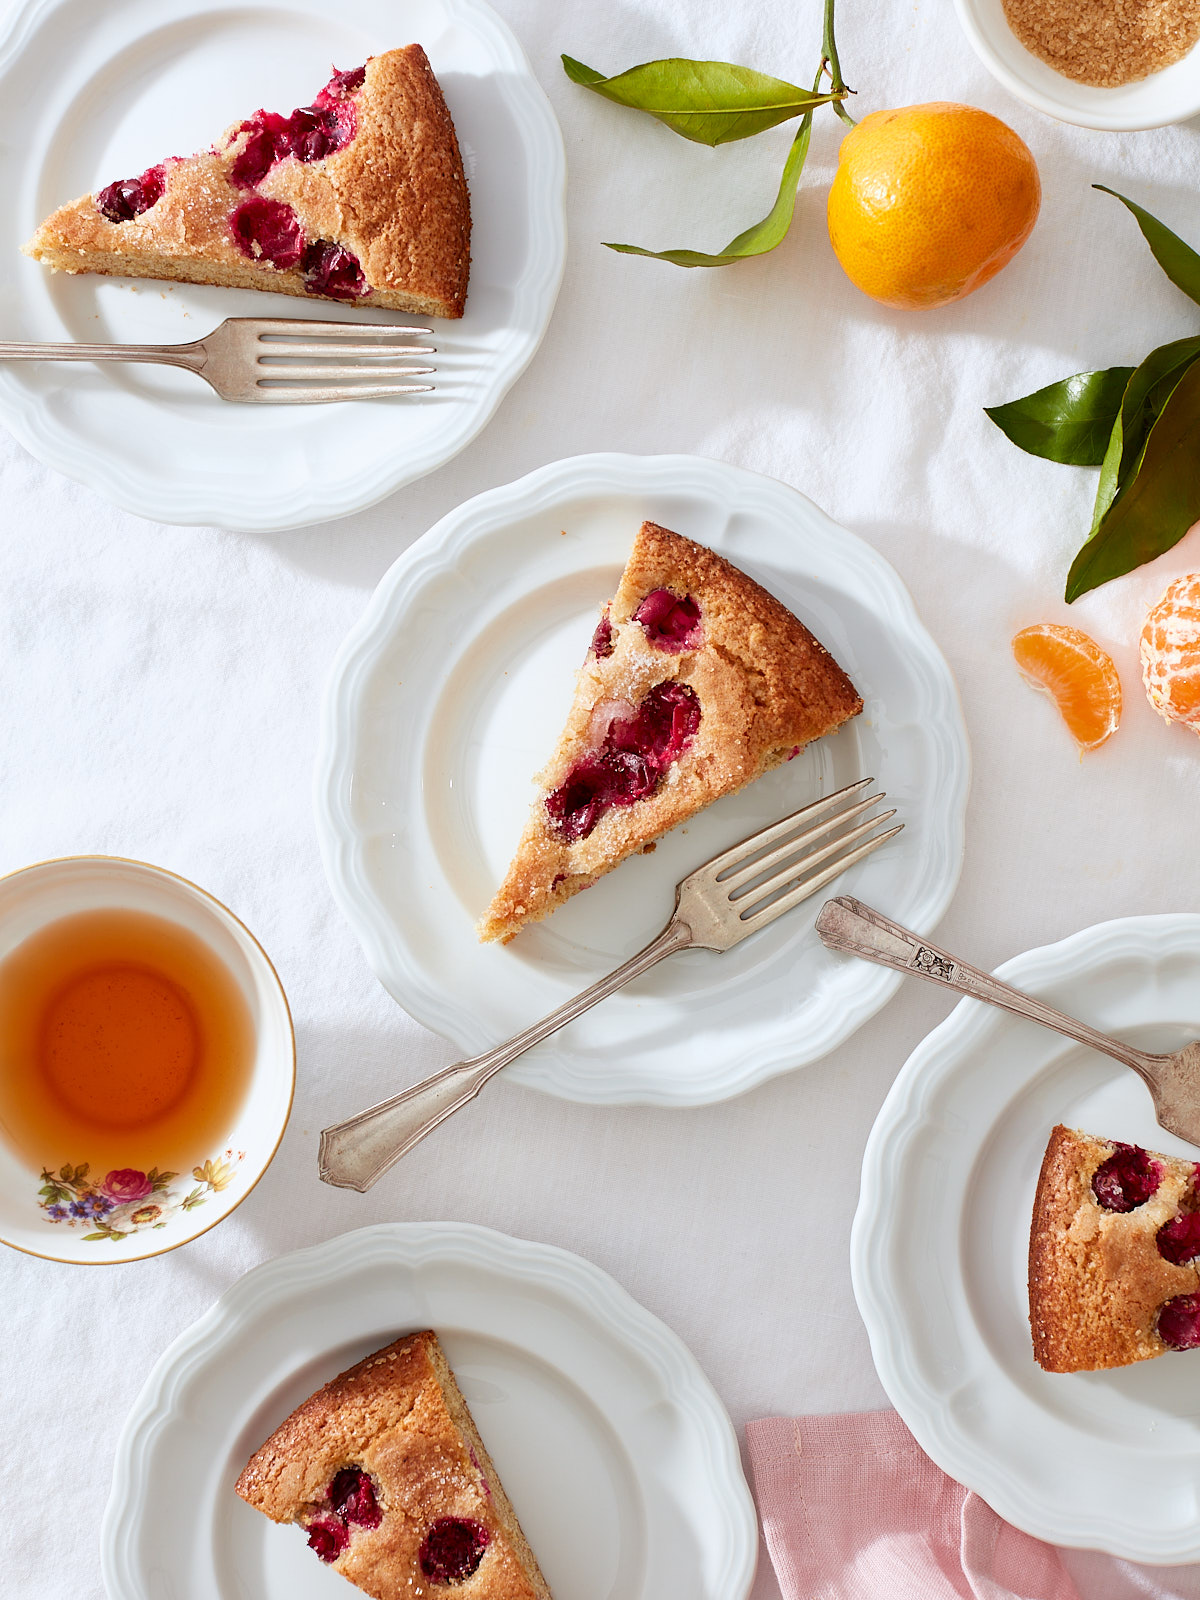 Citrus and Cranberry Buttermilk Cake | Slices of cranberry cake on white porcelain dessert plates with vintage forks, pink linen, tea, and fresh tangerines.